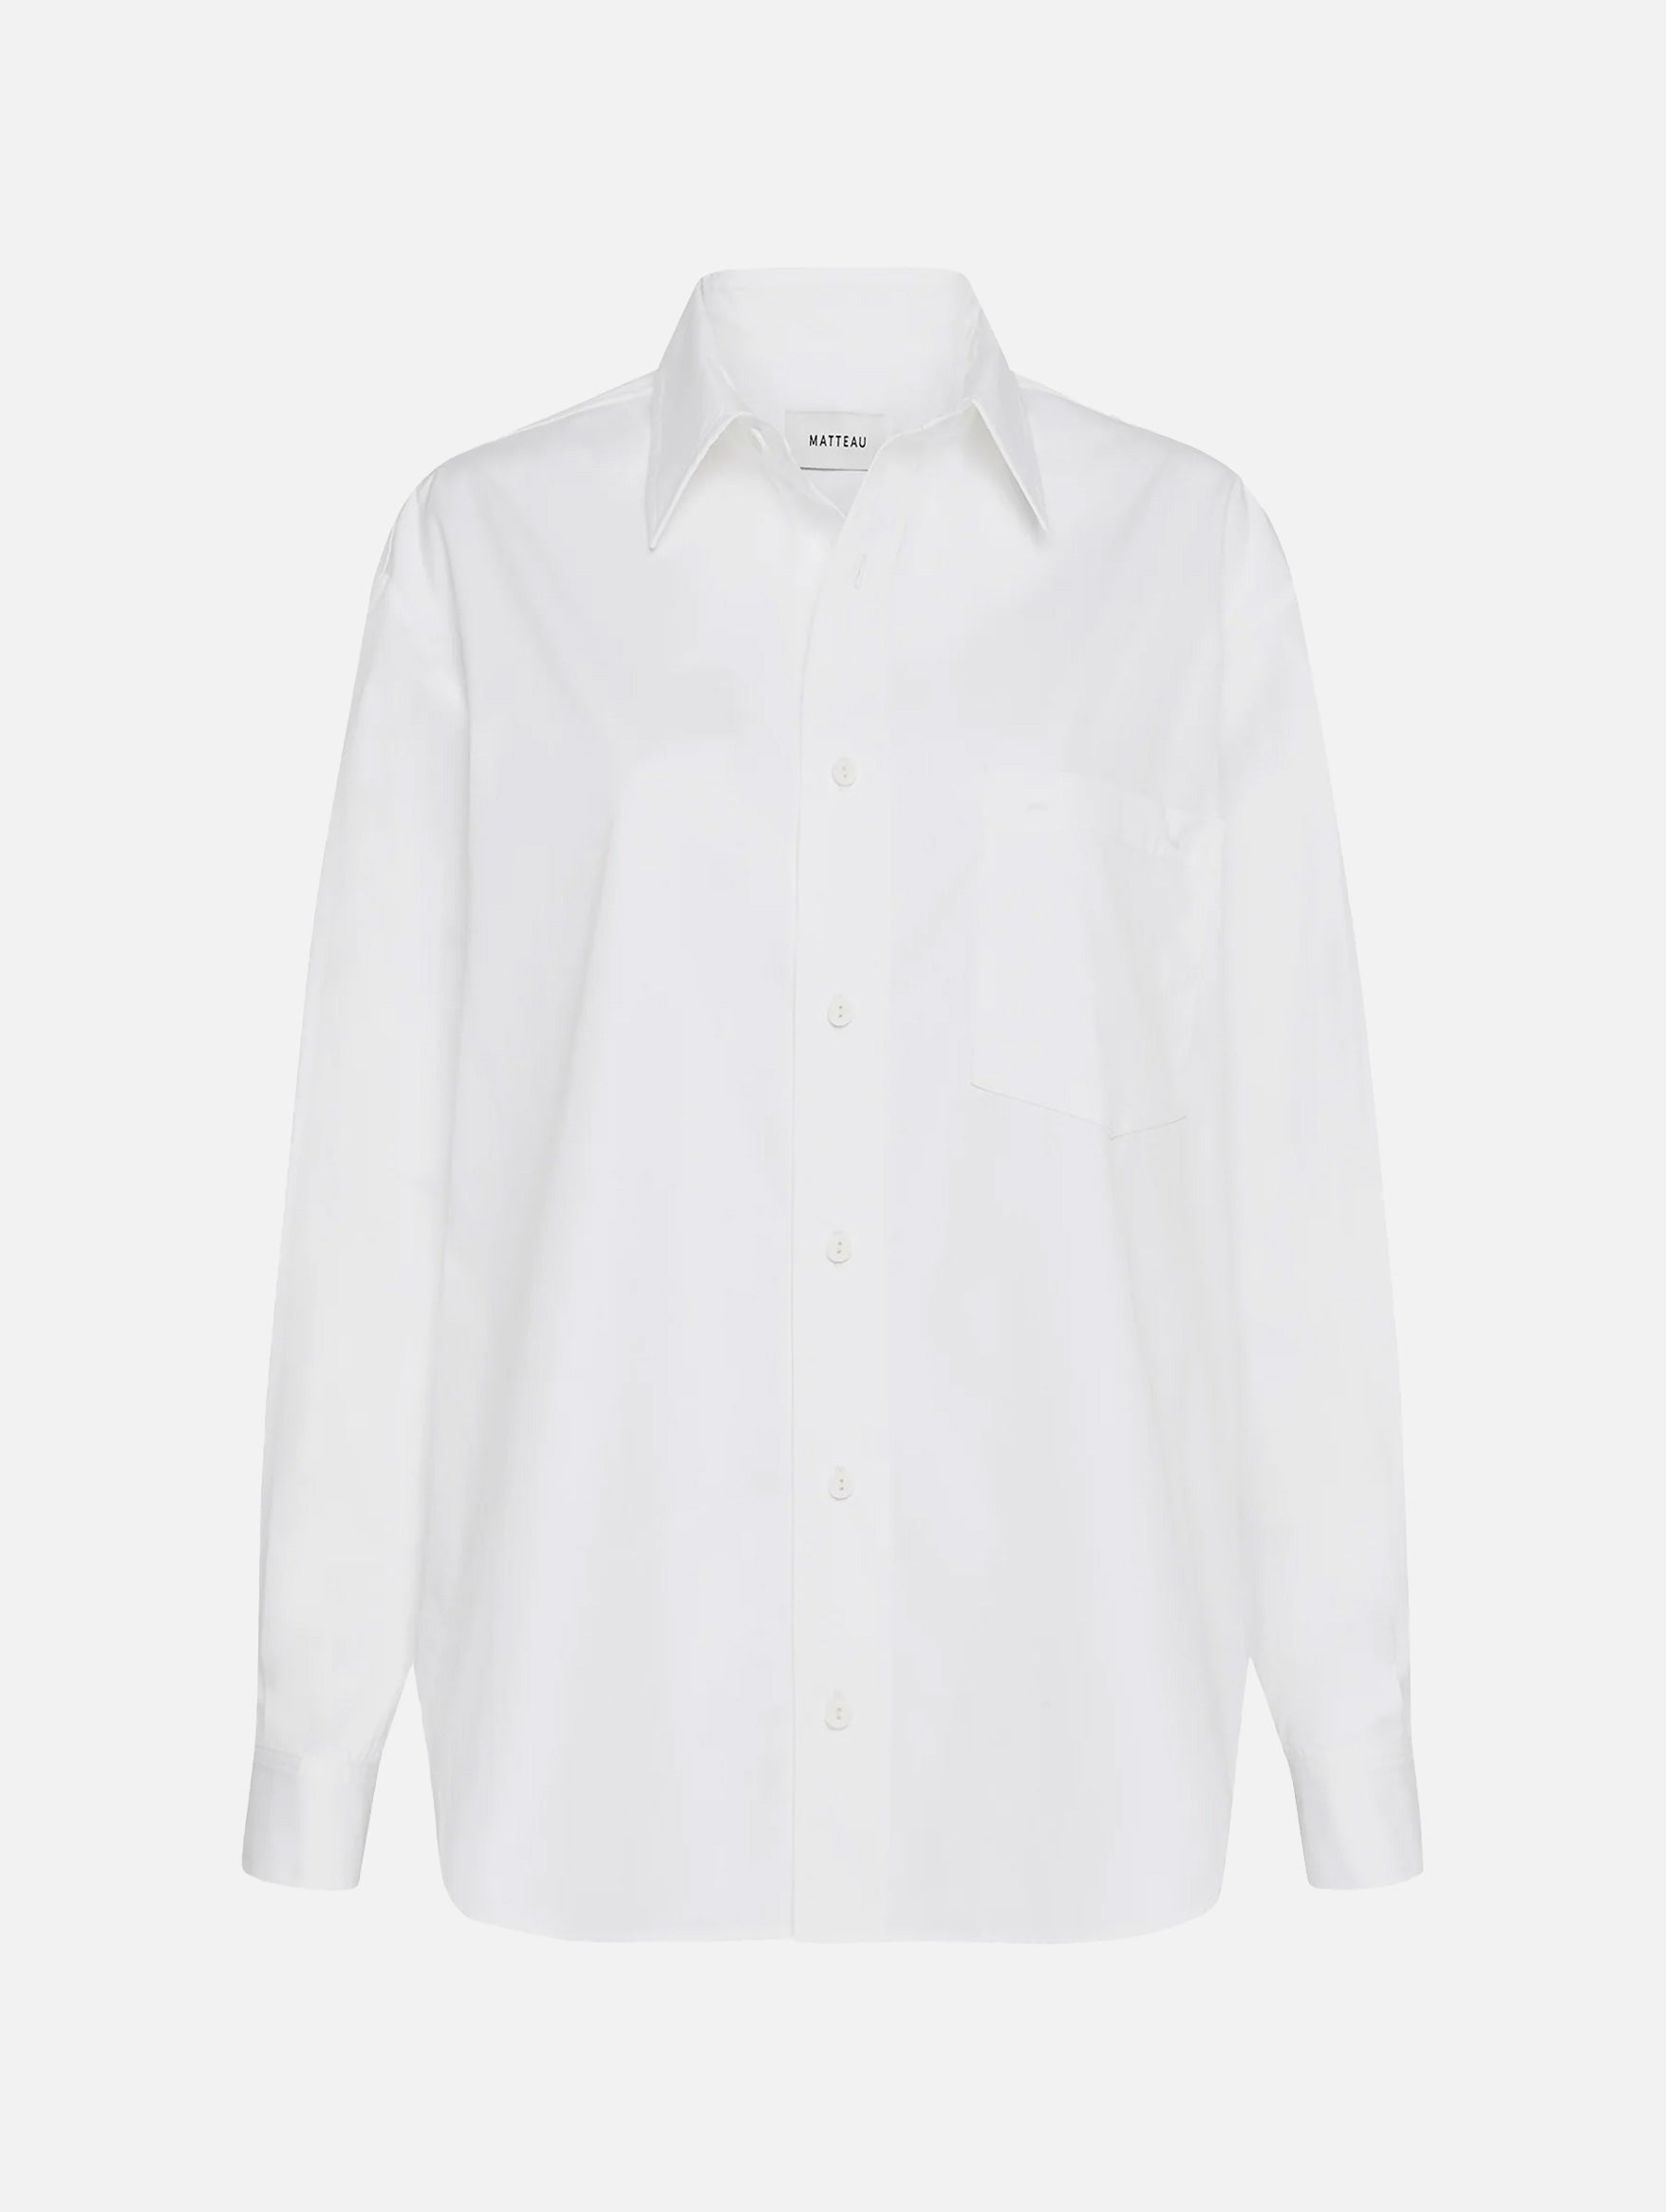 Classic Pocket Shirt in White